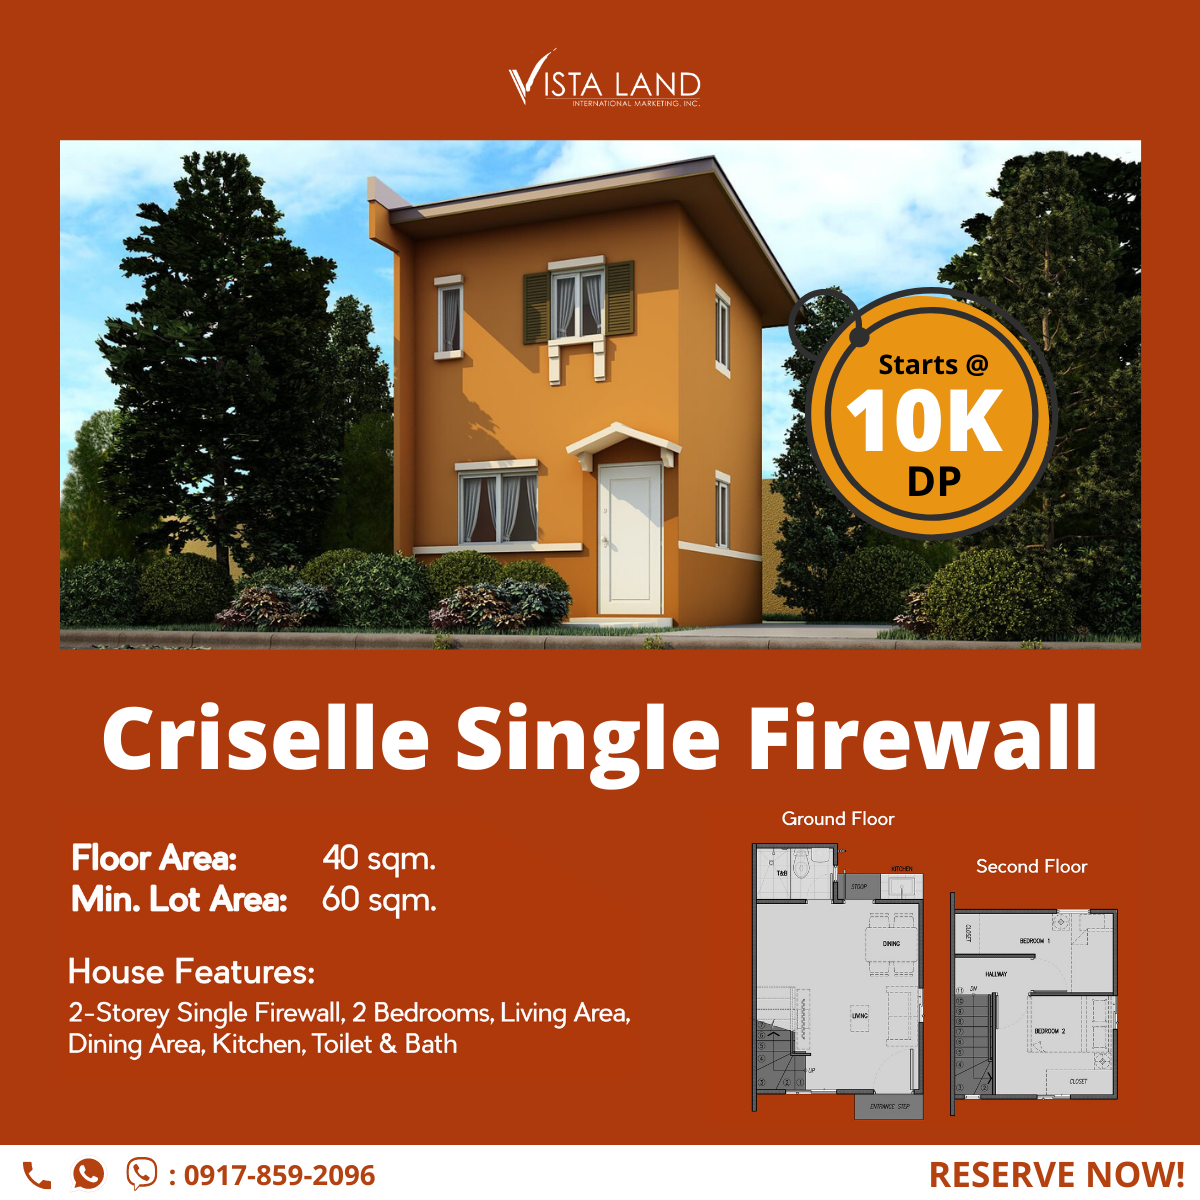 Afforadable House and Lot – Criselle Single Firewall